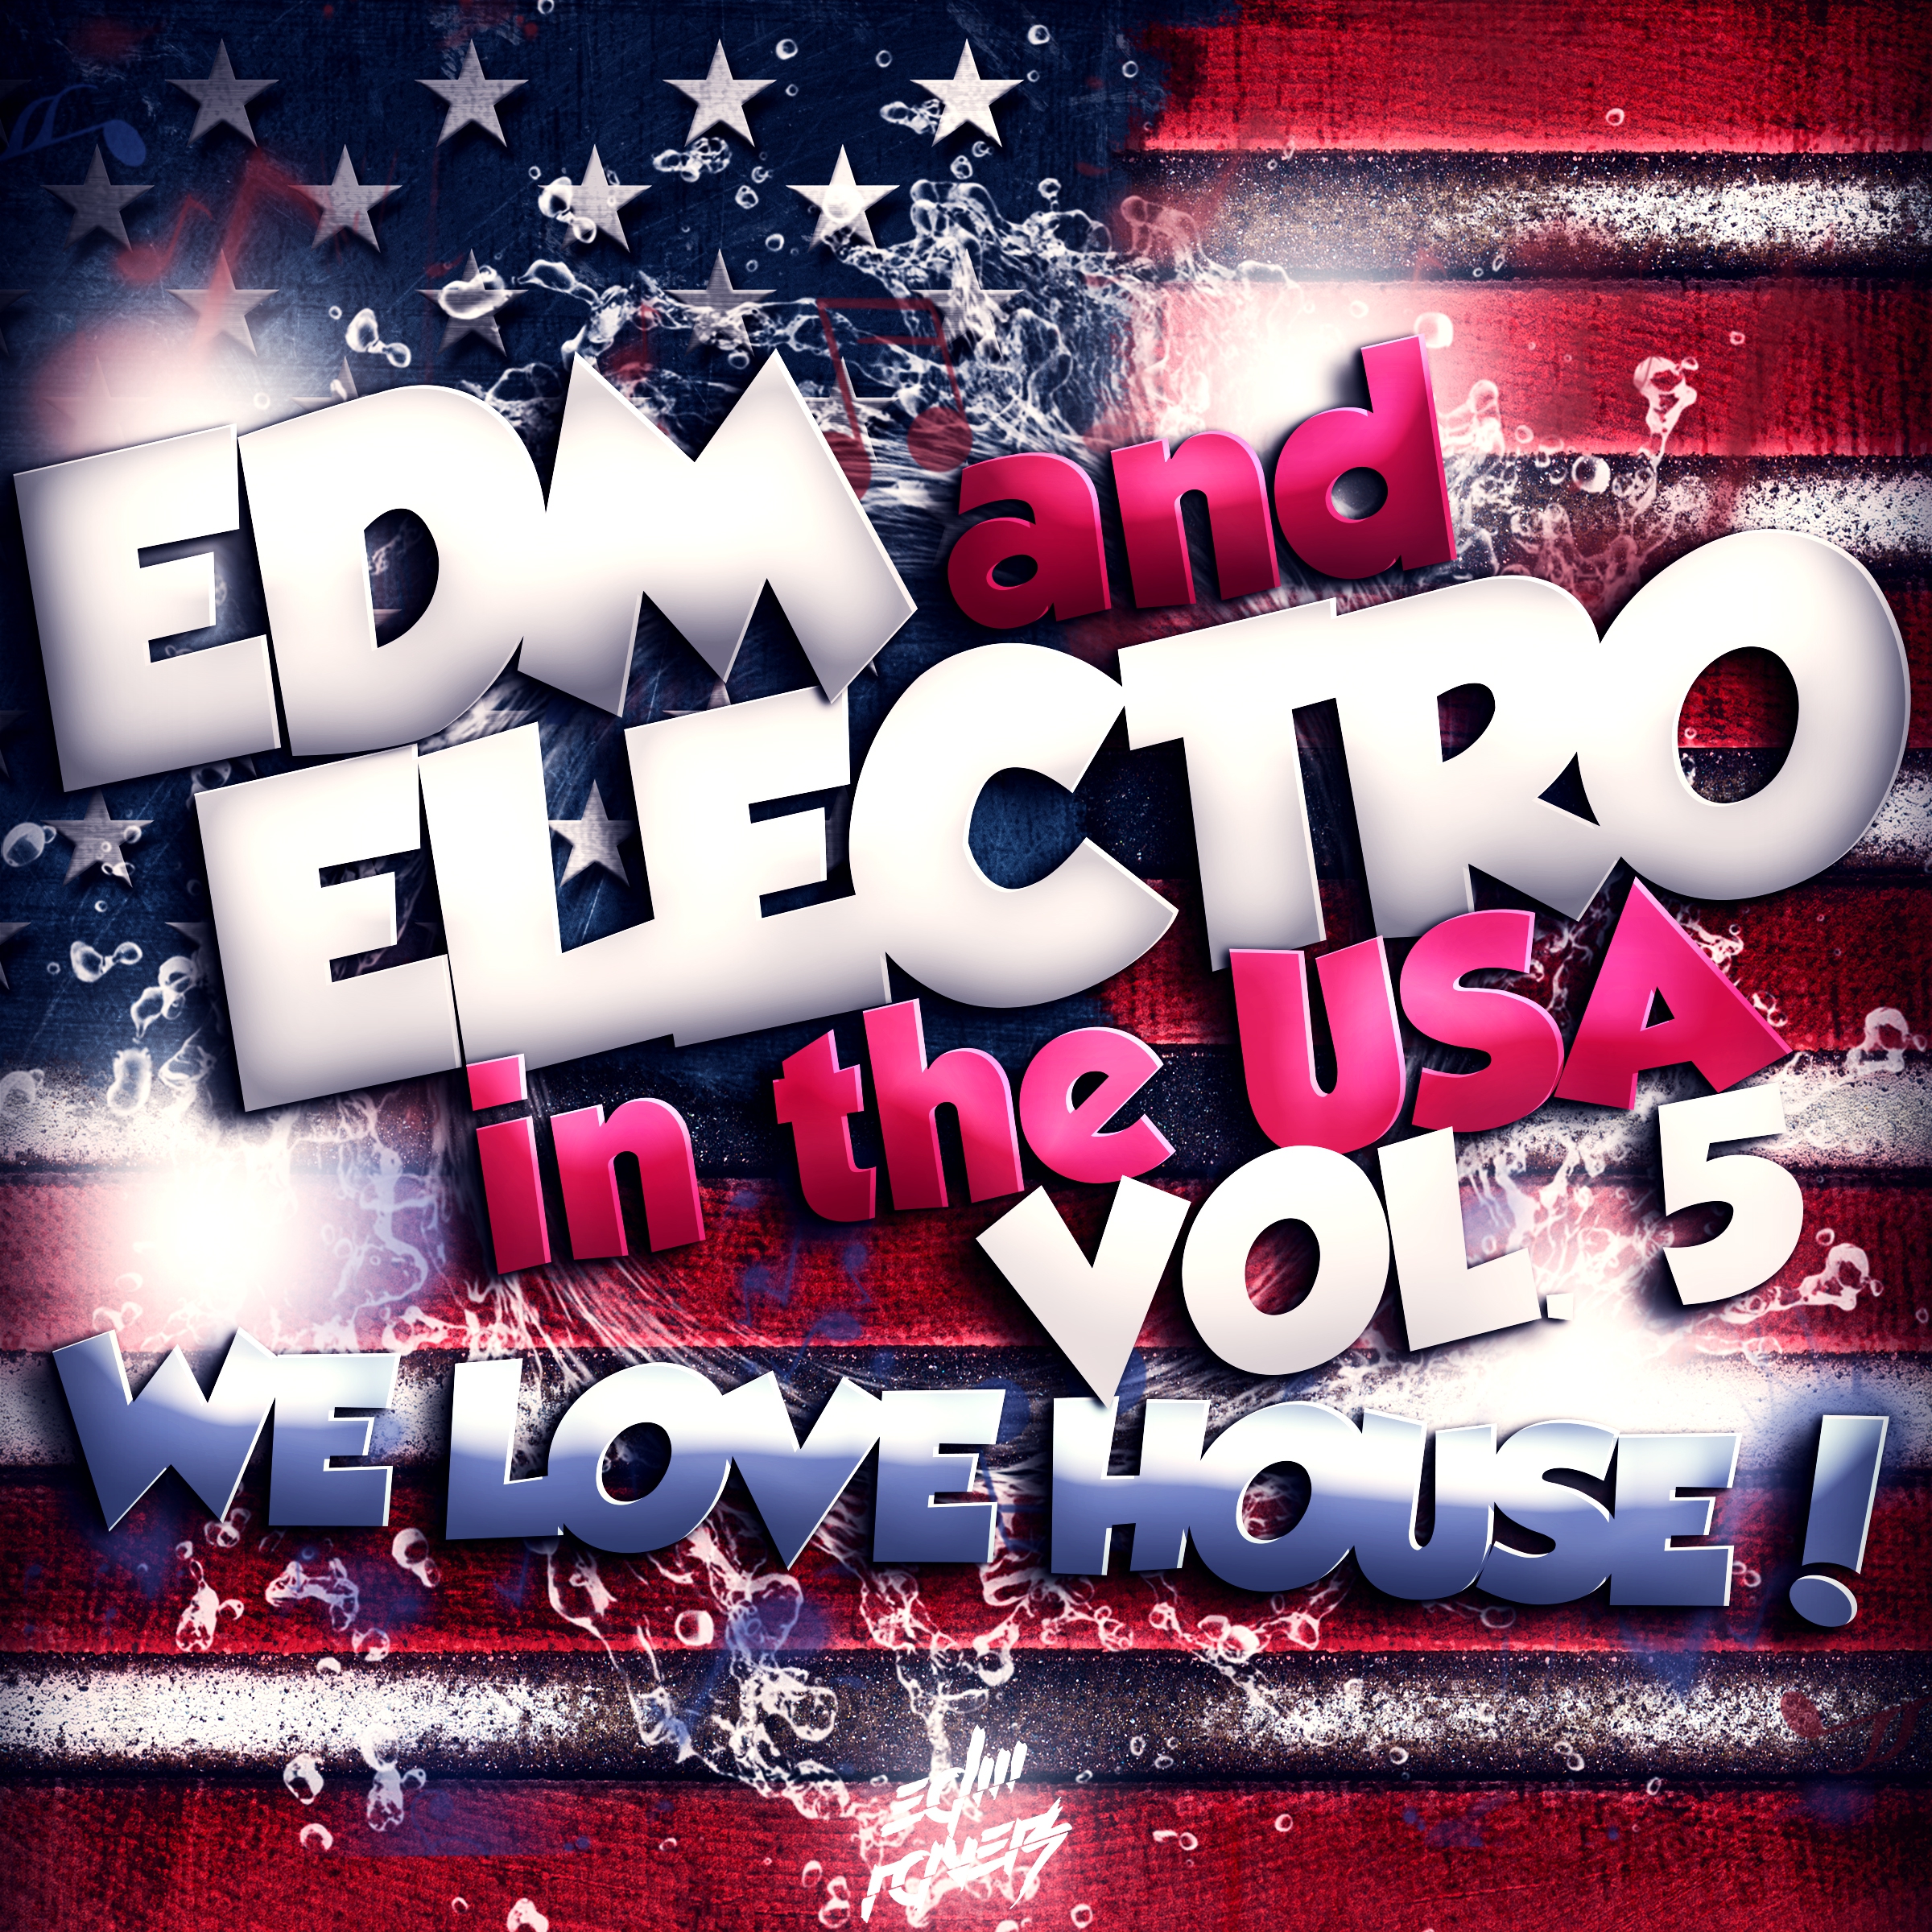 EDM and Electro in the USA, Vol. 5